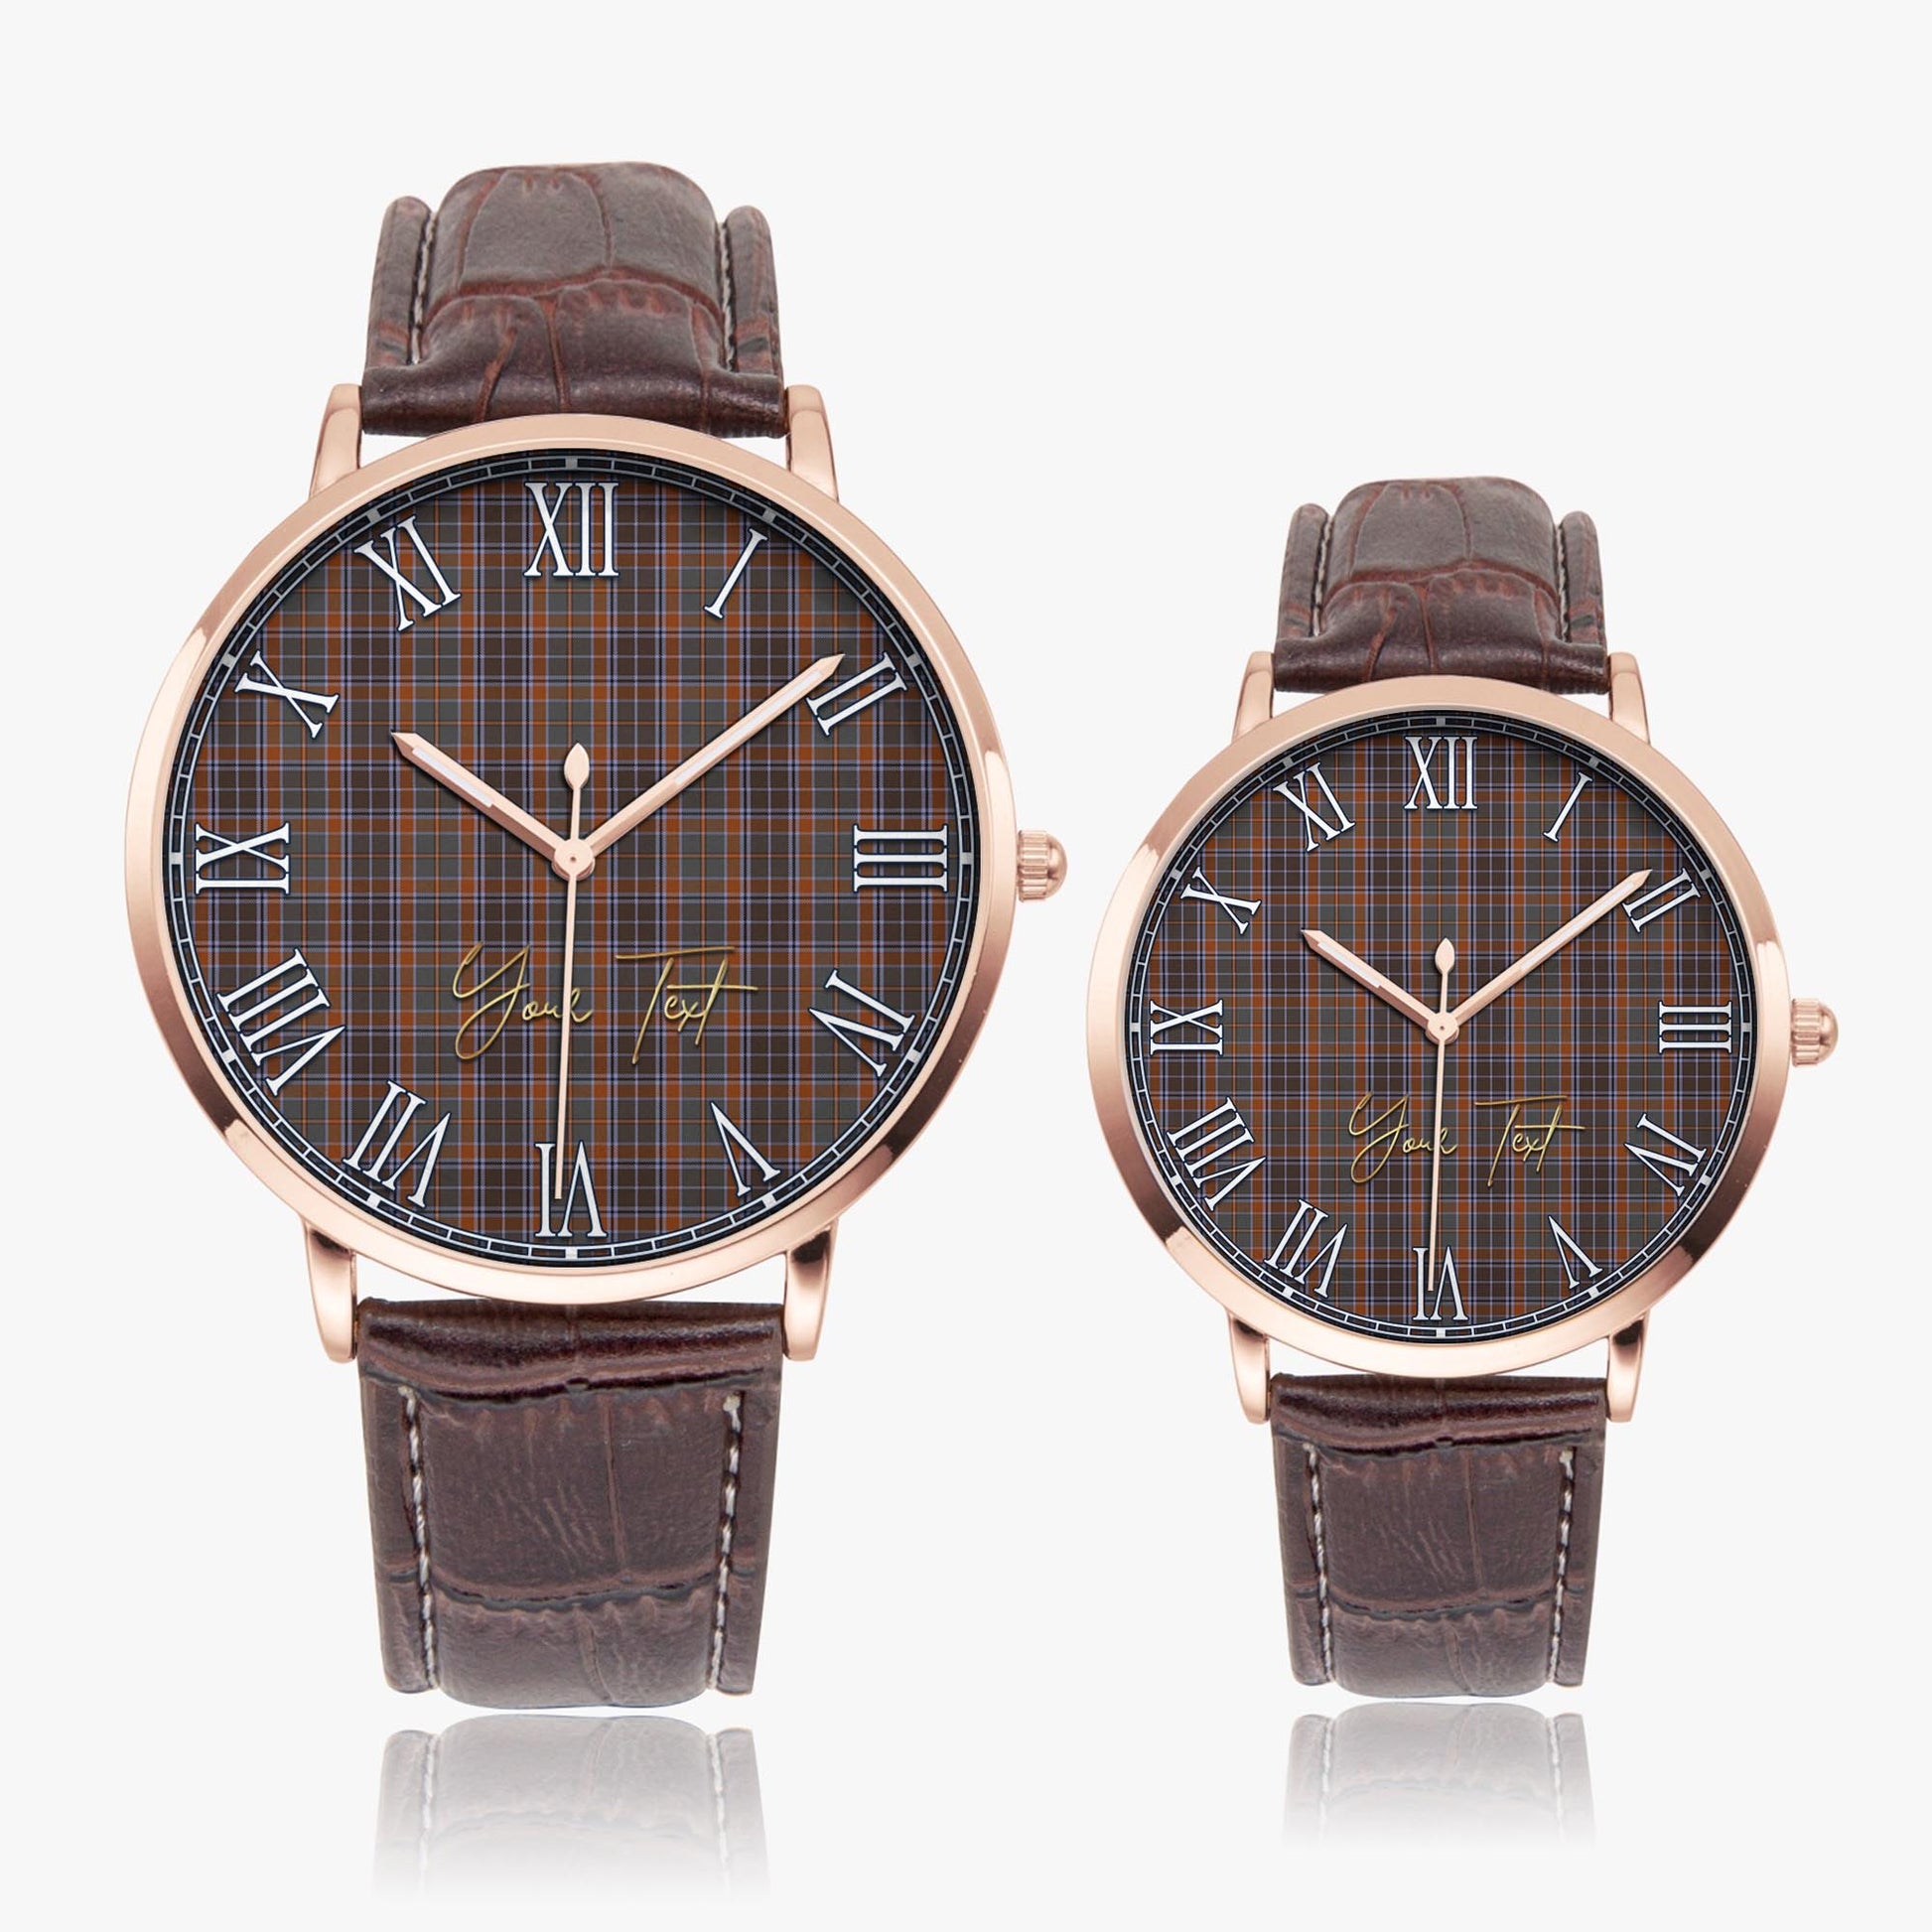 Leitrim County Ireland Tartan Personalized Your Text Leather Trap Quartz Watch Ultra Thin Rose Gold Case With Brown Leather Strap - Tartanvibesclothing